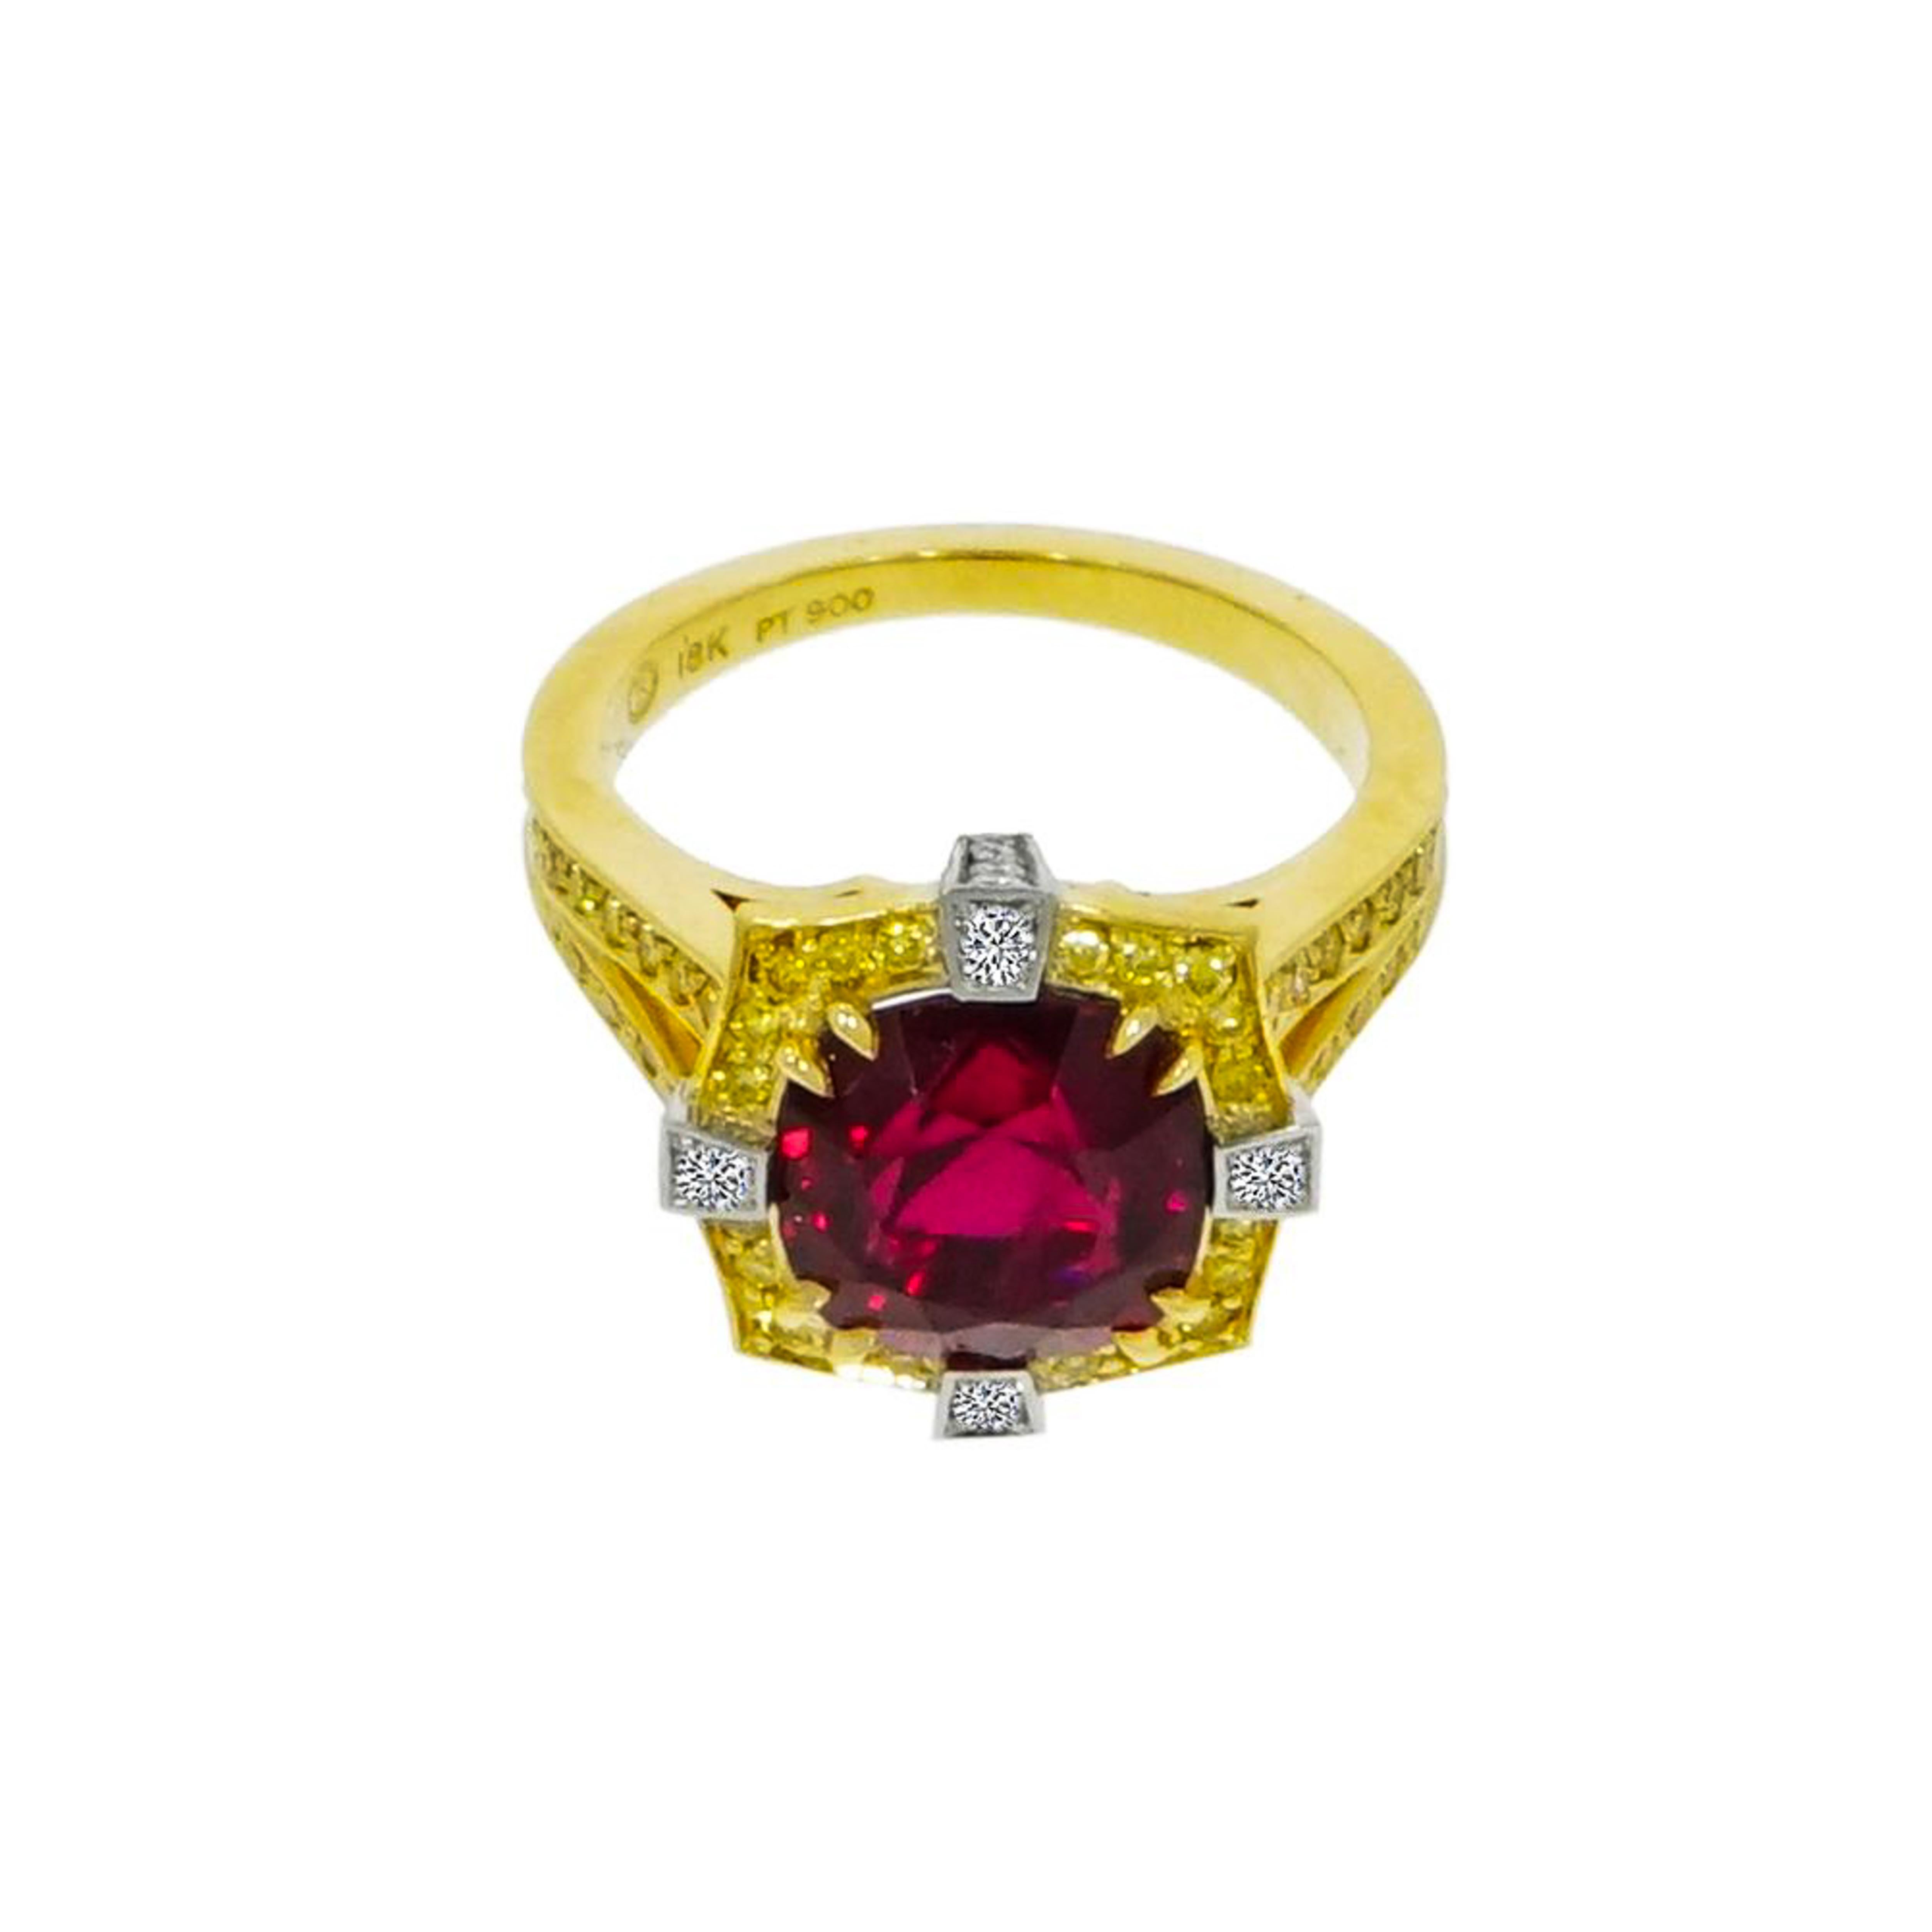 Rich in design and contrast, reflecting inspiration through this 4.35 carat Natural Red Spinel set in 18K Yellow Gold with Vivid Fancy Intense Yellow Diamond Halo and accented by 4 white round Diamonds at each corner set in Platinum. 
The Natural